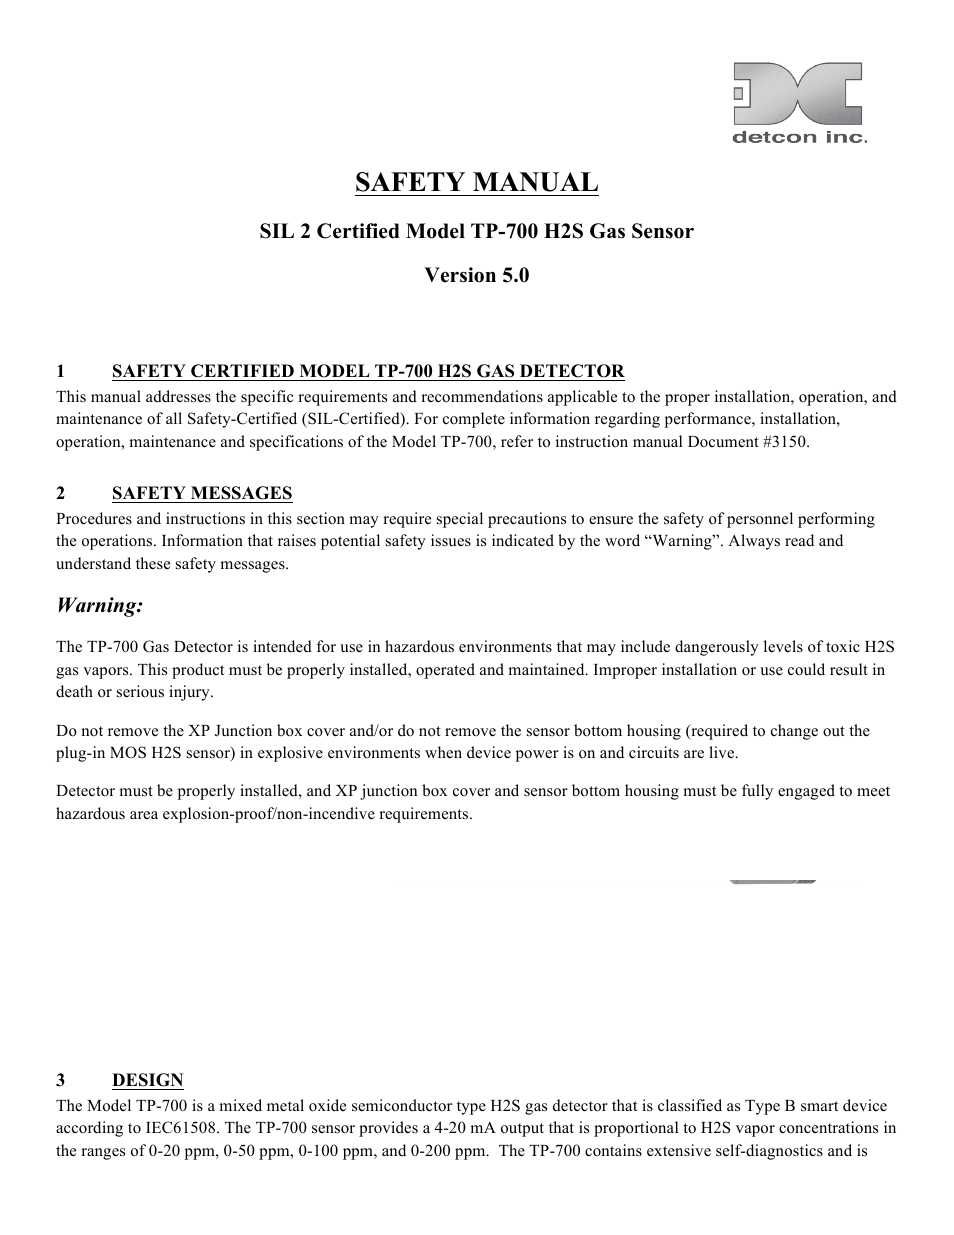 TP-700 SIL 2 Safety Manual